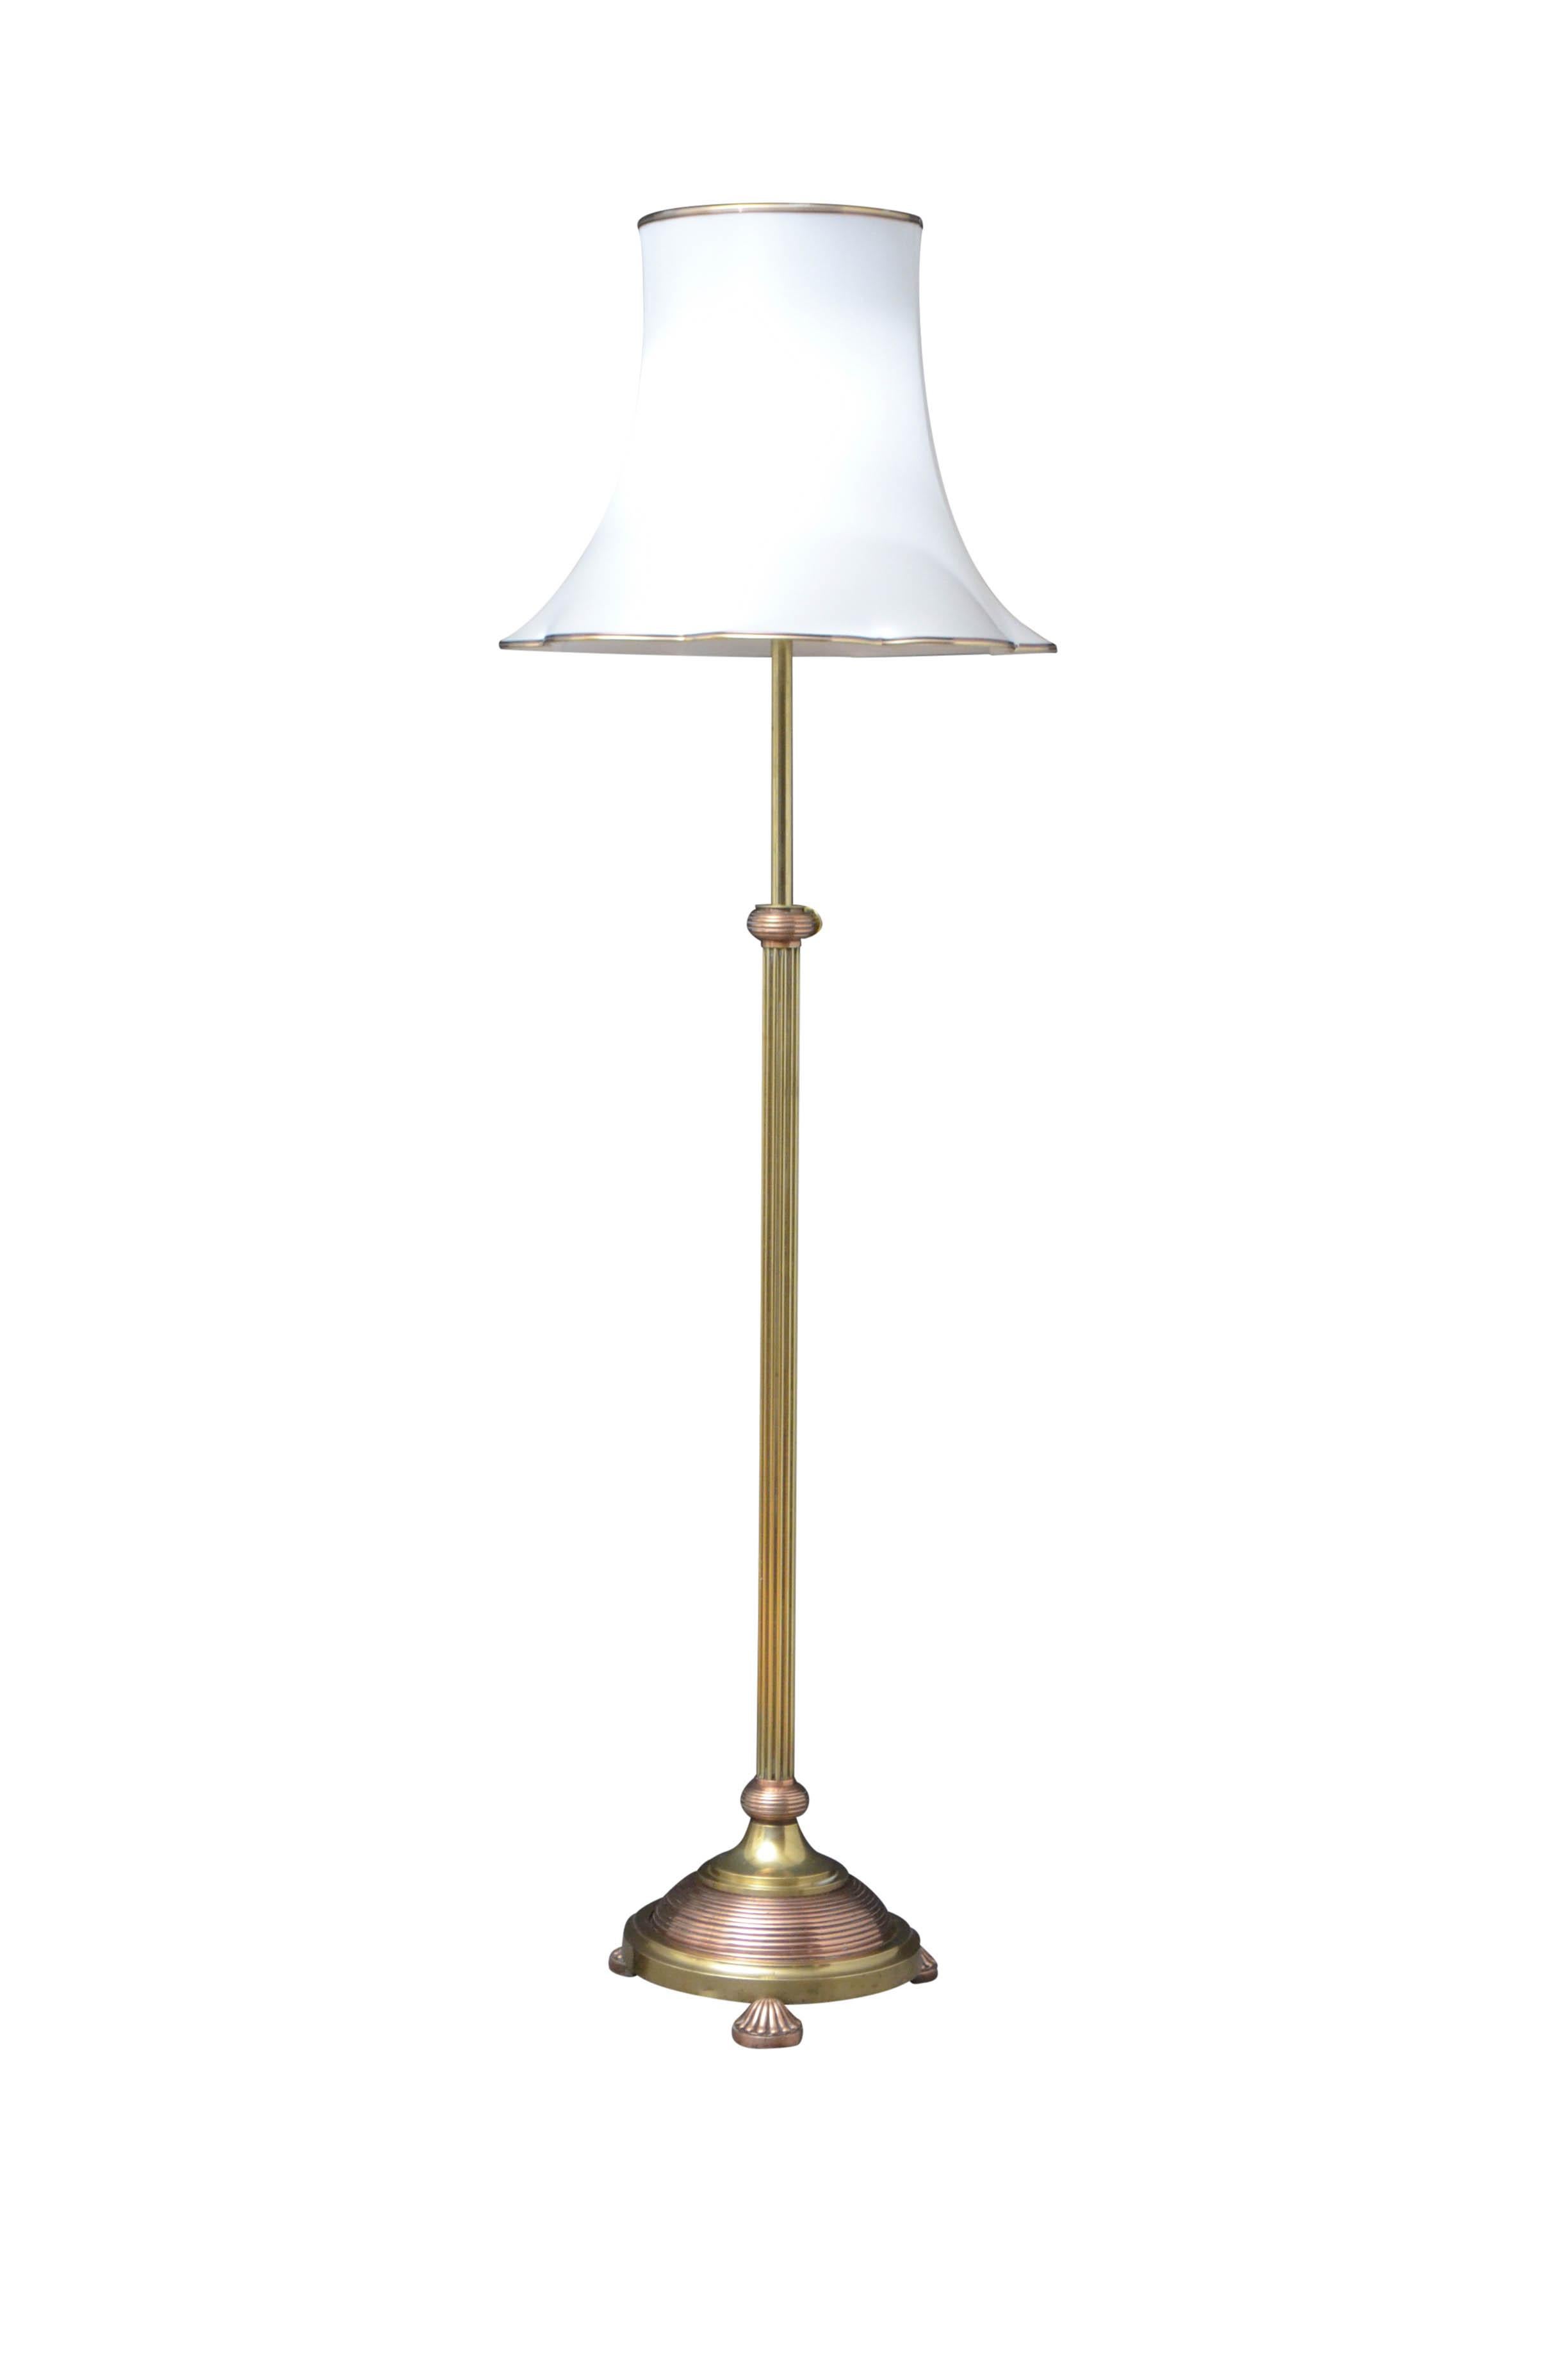 Elegant Edwardian height adjustable standard lamp with brass reeded column terminating in circular copper base and fluted pad feet in copper. This antique lamp has been cleaned and polished, professionally rewired and pat tested, all in home ready